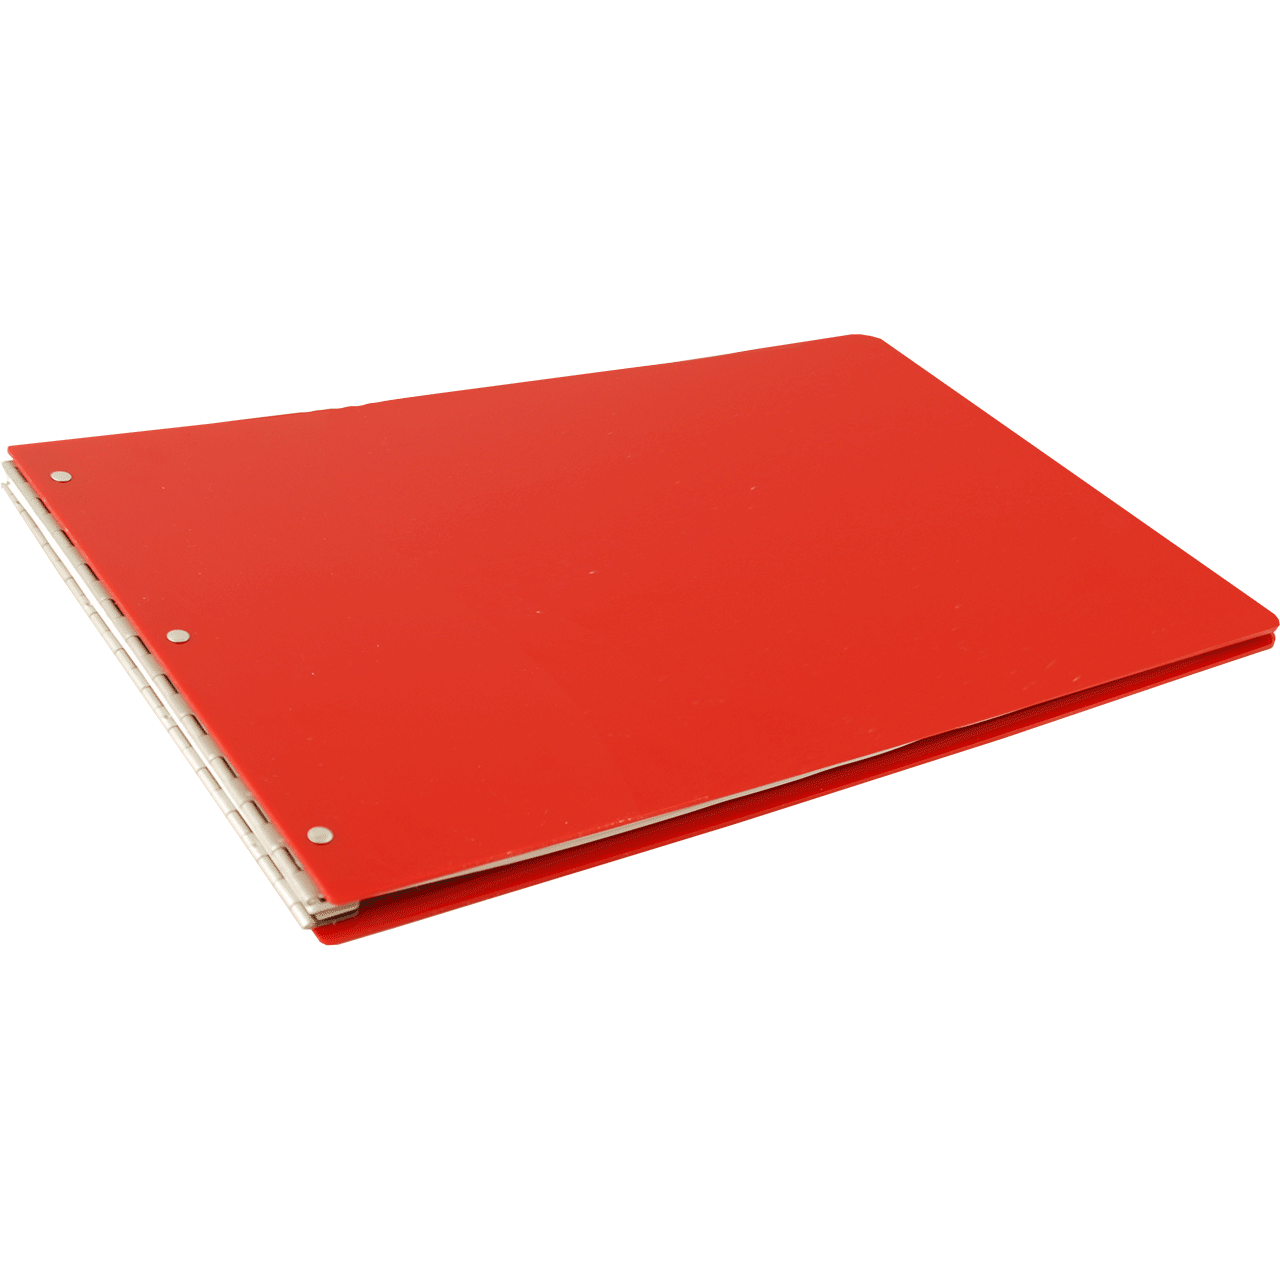 11x17 Screw Post Binder Acrylic Panel with fixed posts Red